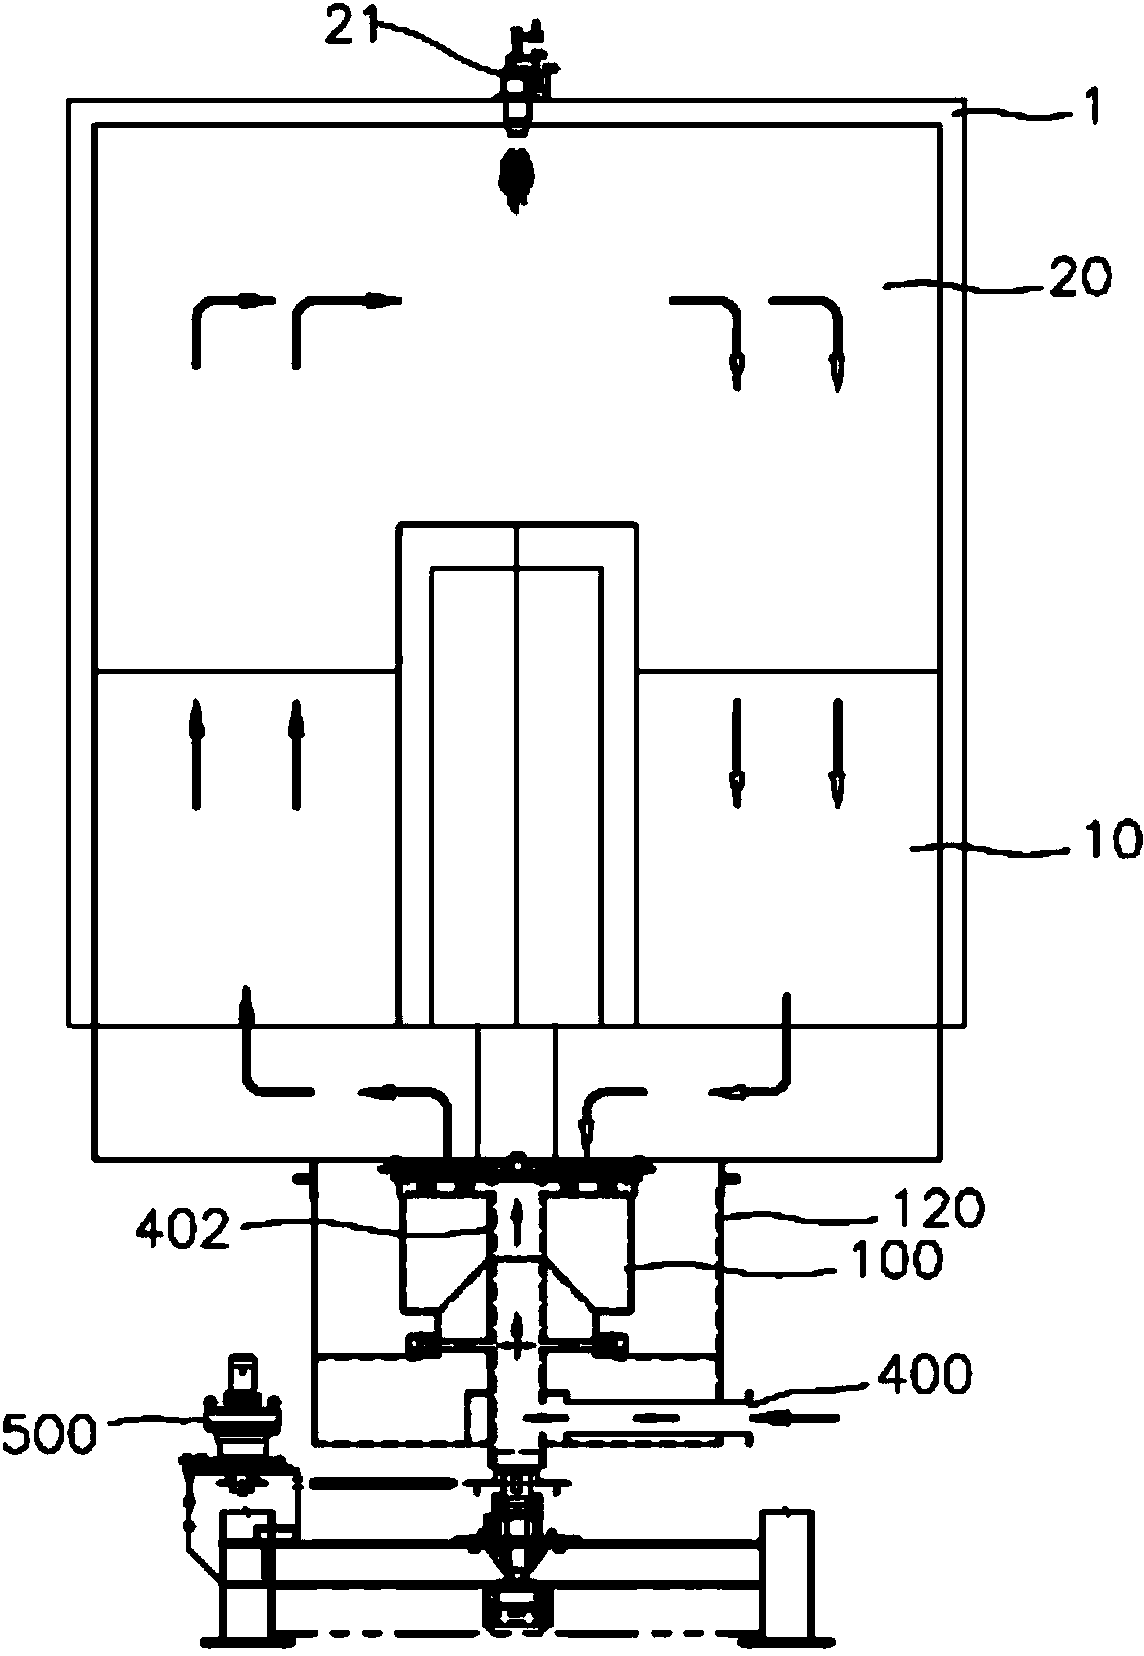 Heat accumulating type combustion device with rotary valve capable of improving sealing during wind direction conversion process